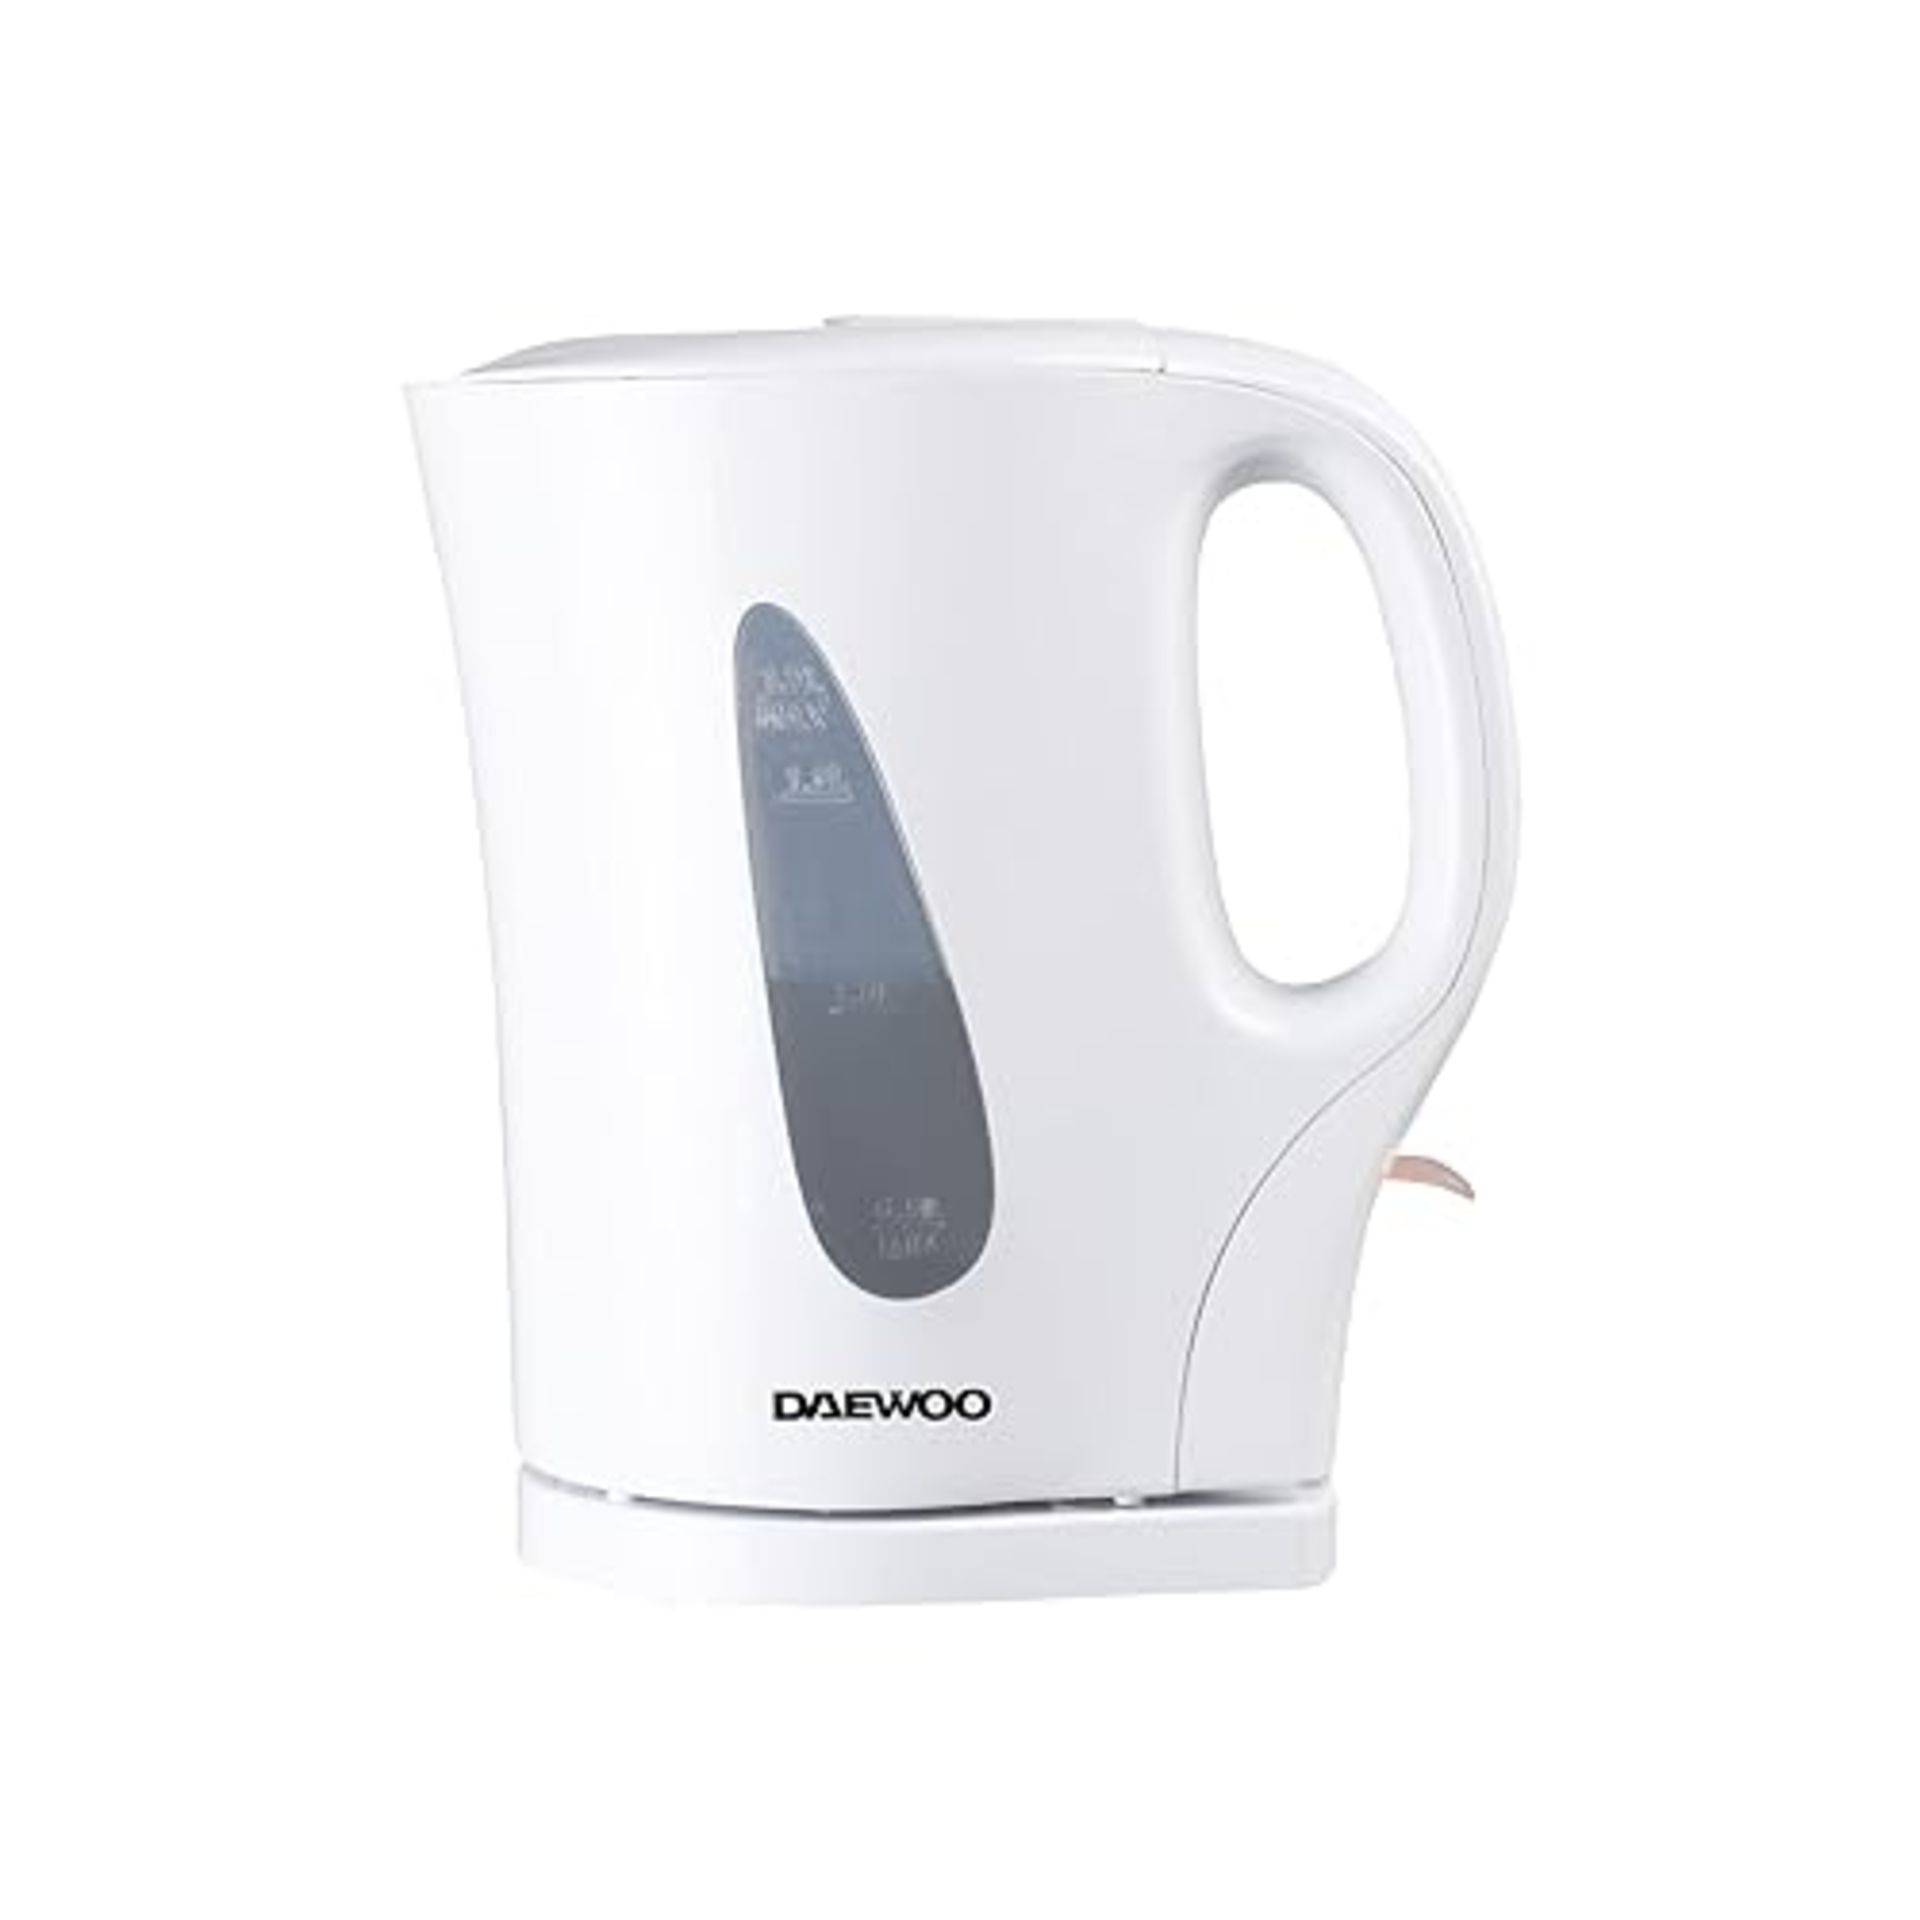 Daewoo Essentials, Plastic Kettle, White, 1.7 Litre Capacity, Fill 7 Cups, Family Size, Visible Wat